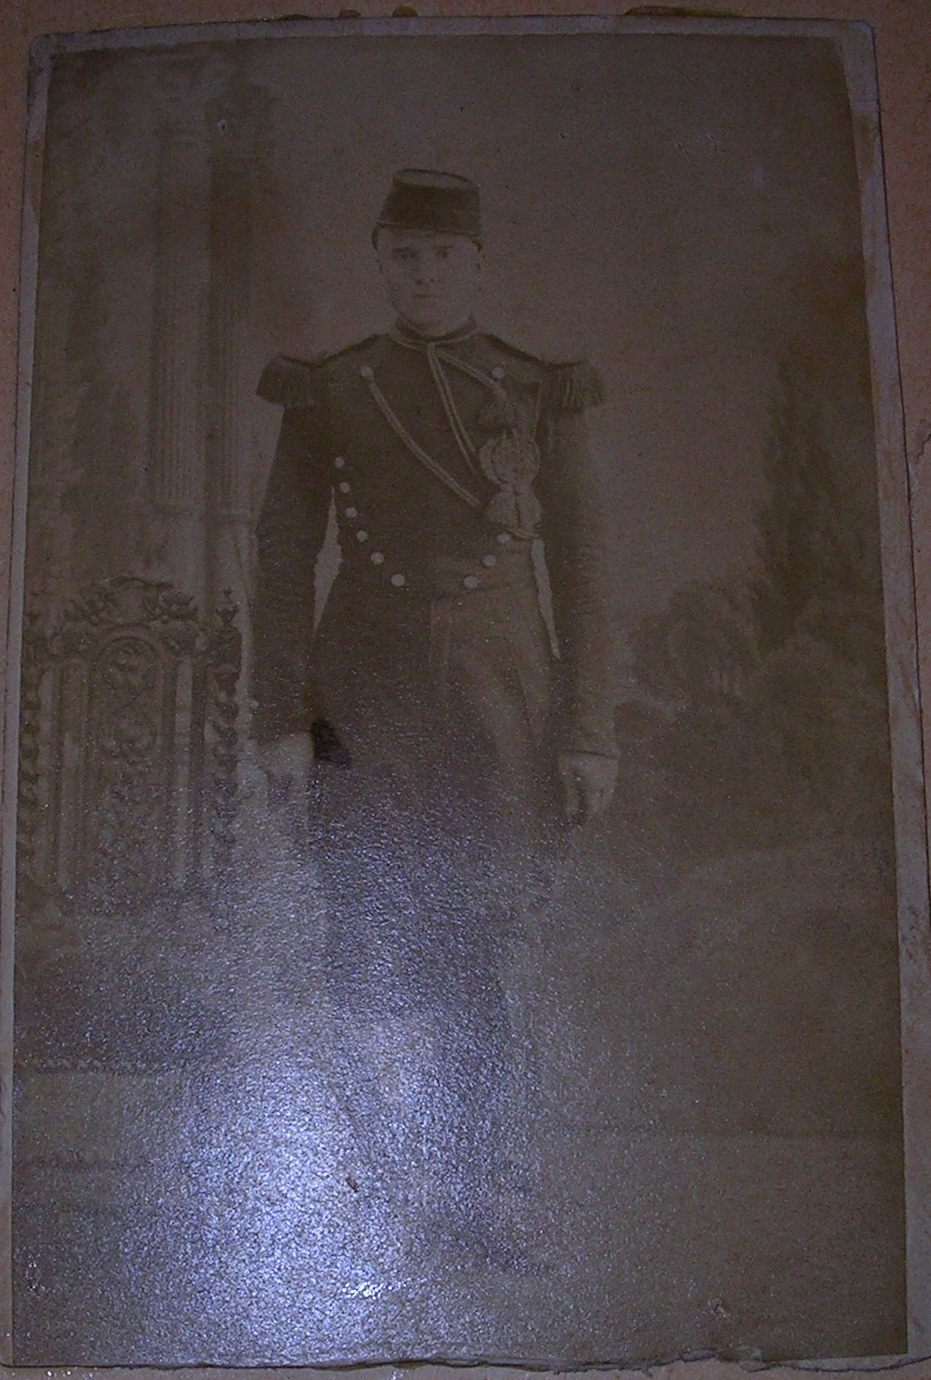 Fritz in his army uniform cropped